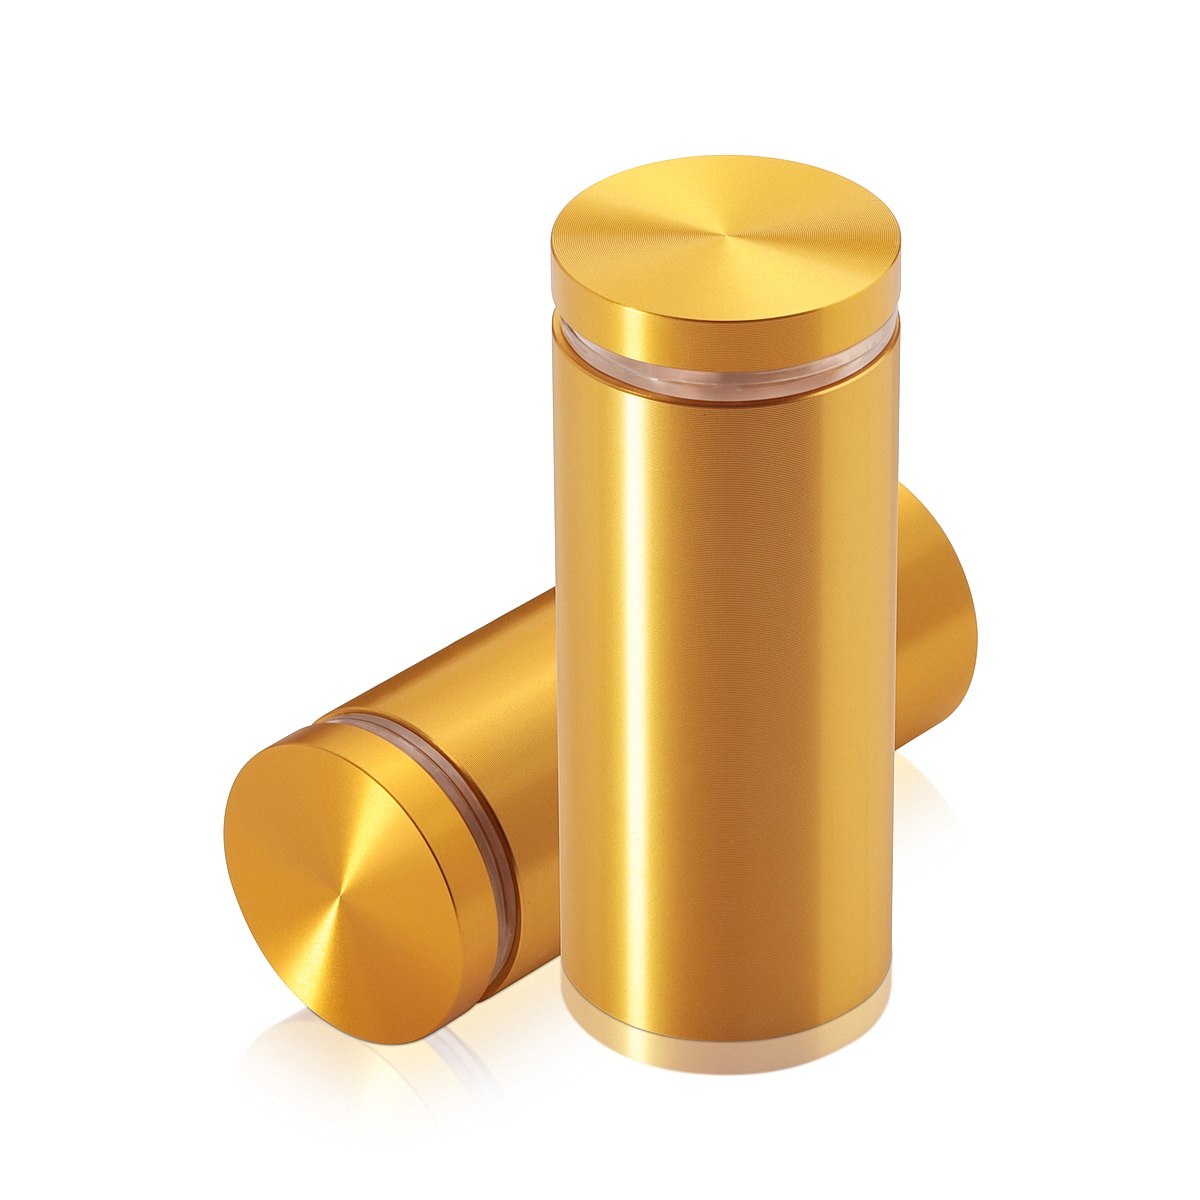 1-1/4'' Diameter X 2-1/2'' Barrel Length, Aluminum Flat Head Standoffs, Gold Anodized Finish Easy Fasten Standoff (For Inside / Outside use) Tamper Proof Standoff [Required Material Hole Size: 7/16'']